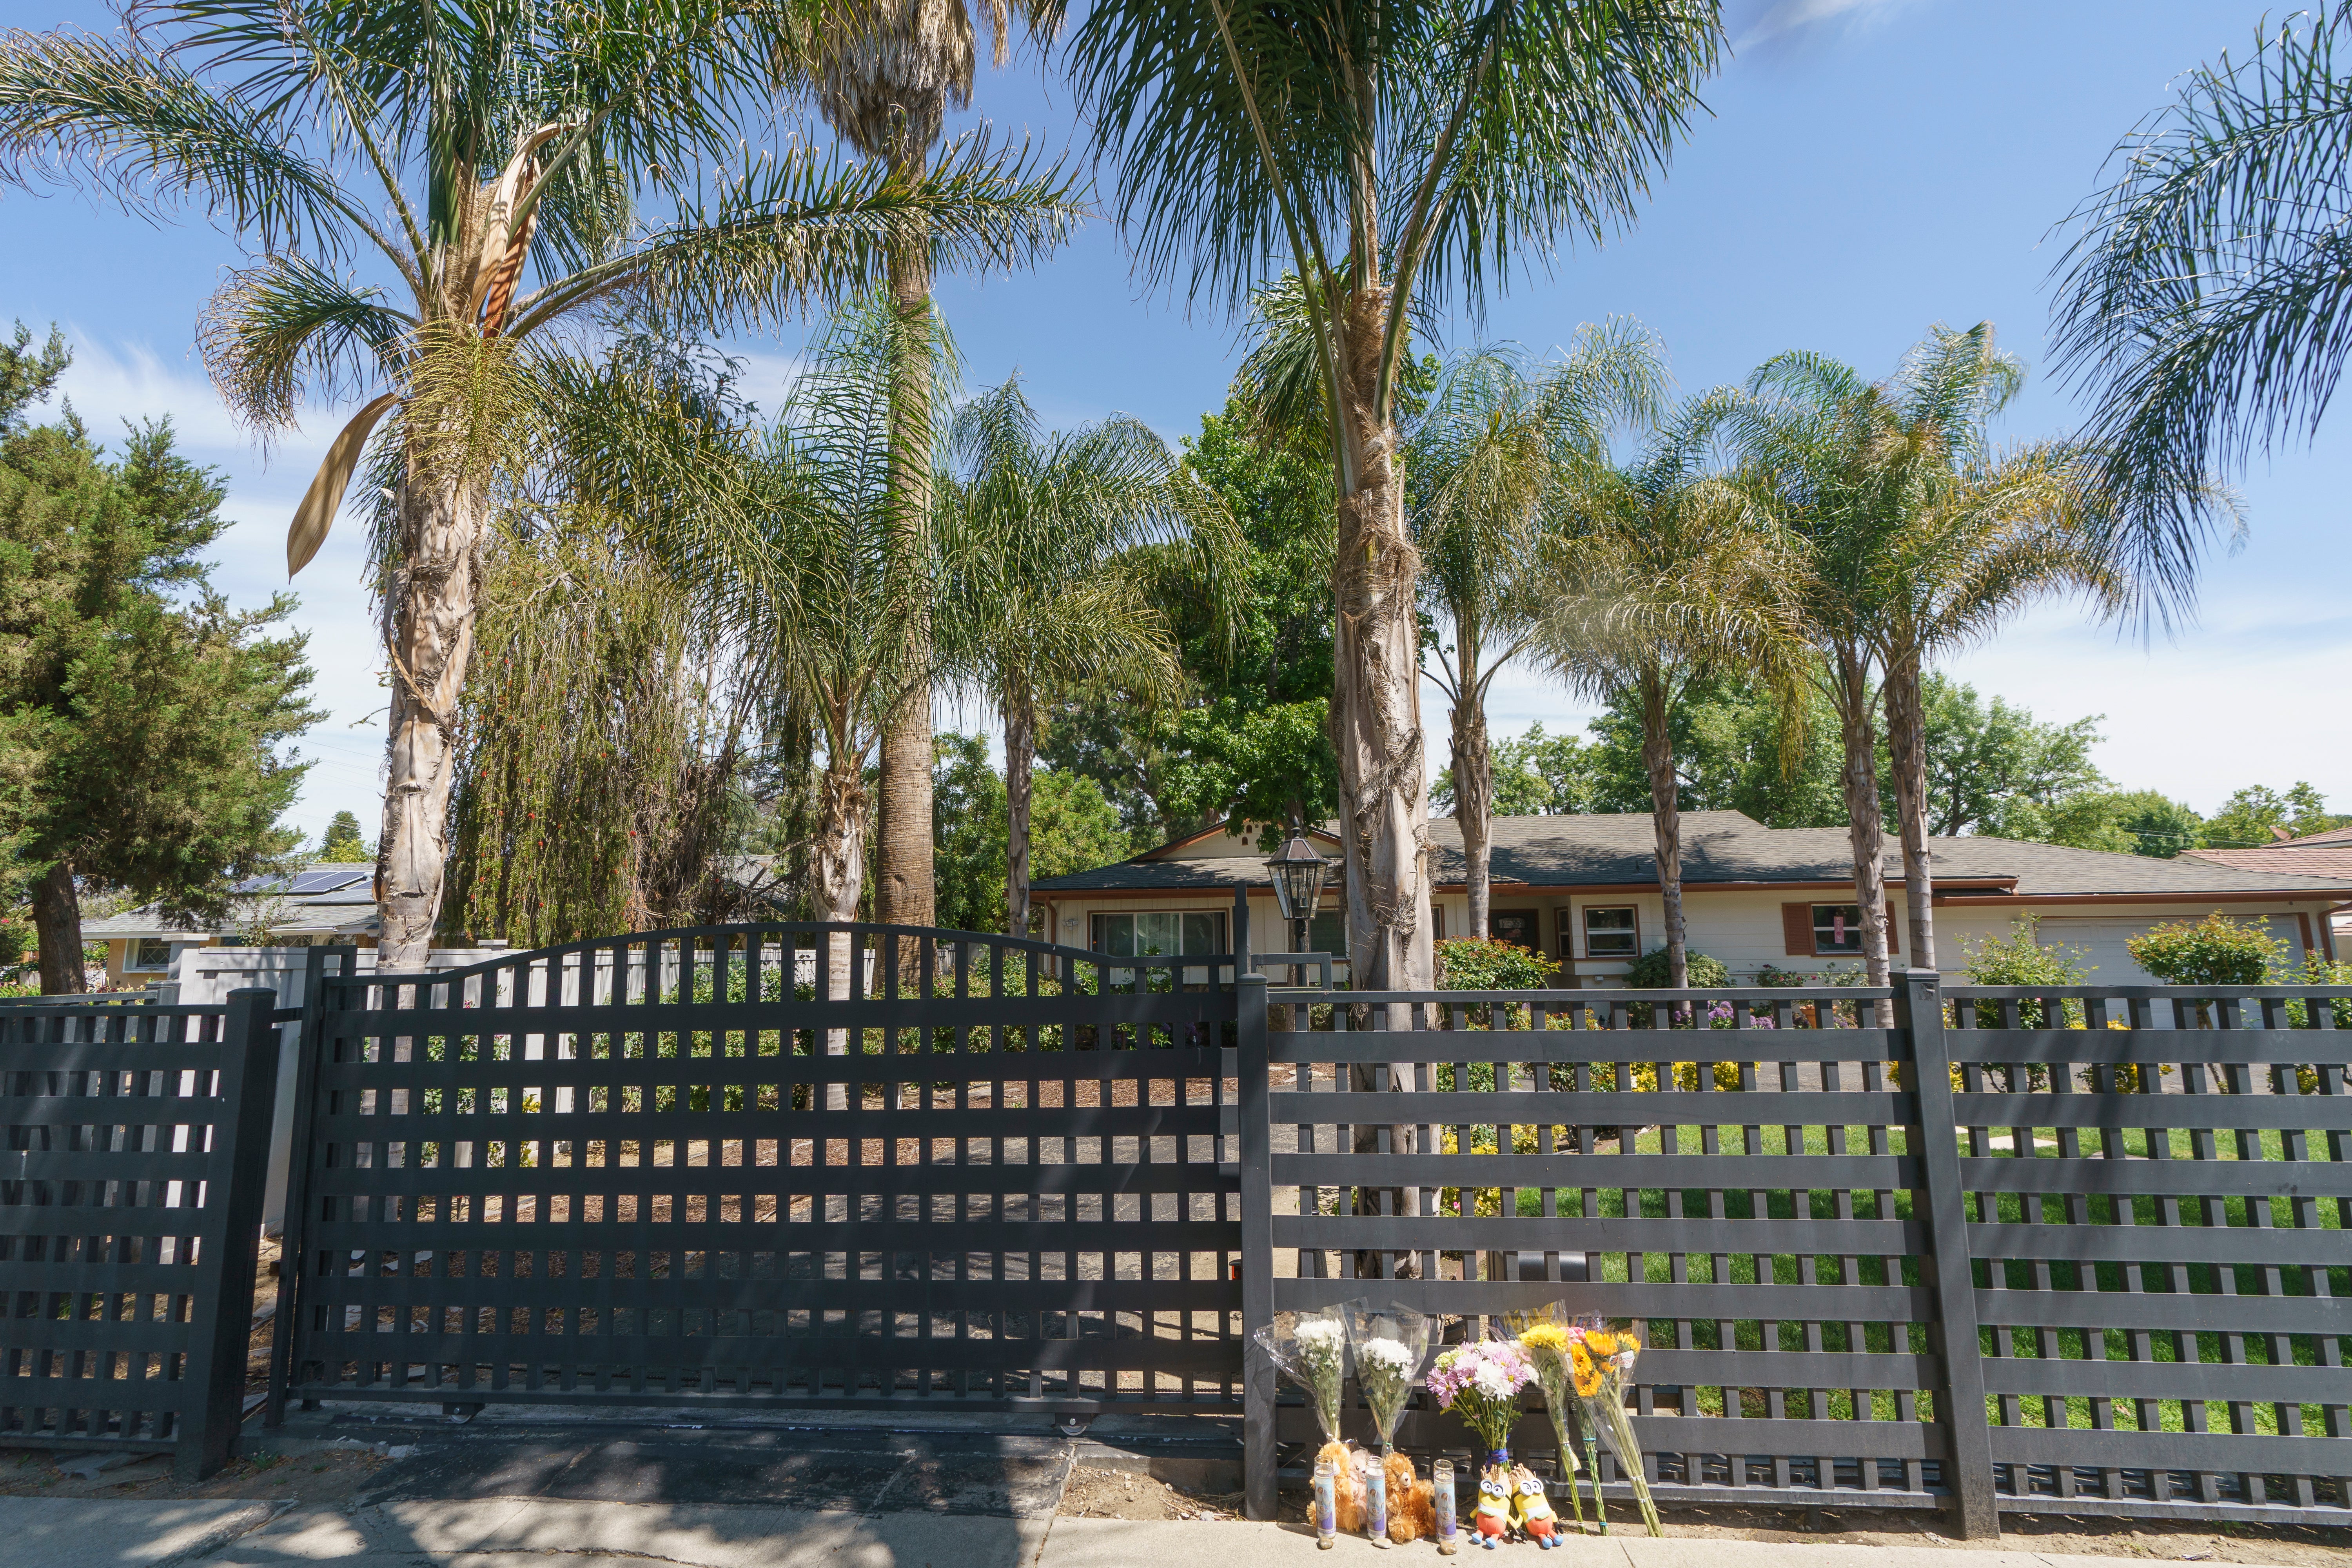 Flowers and teddy bears are left outside a ranch-style house in the West Hills neighborhood of the San Fernando Valley in Los Angeles, Monday, May 9, 2022.